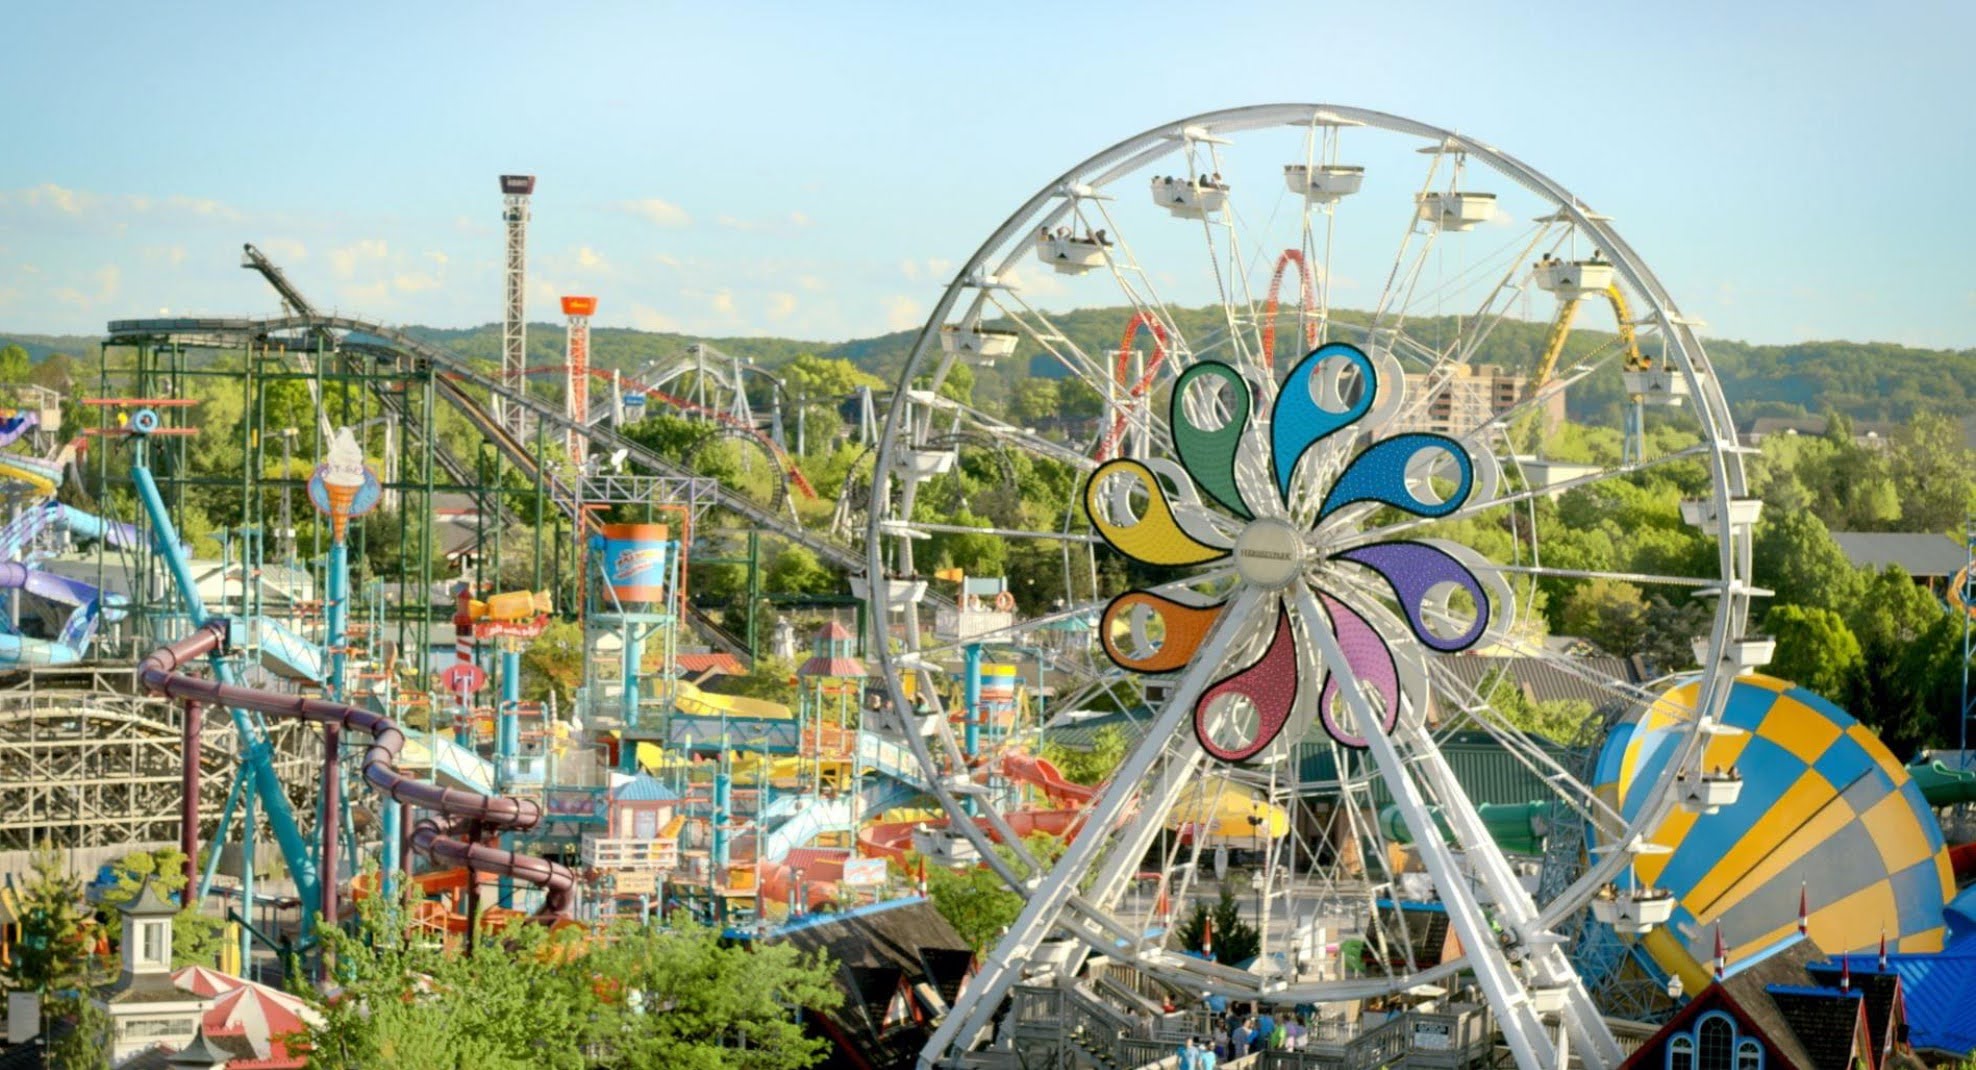 12 Easy tips for fun at HersheyPark